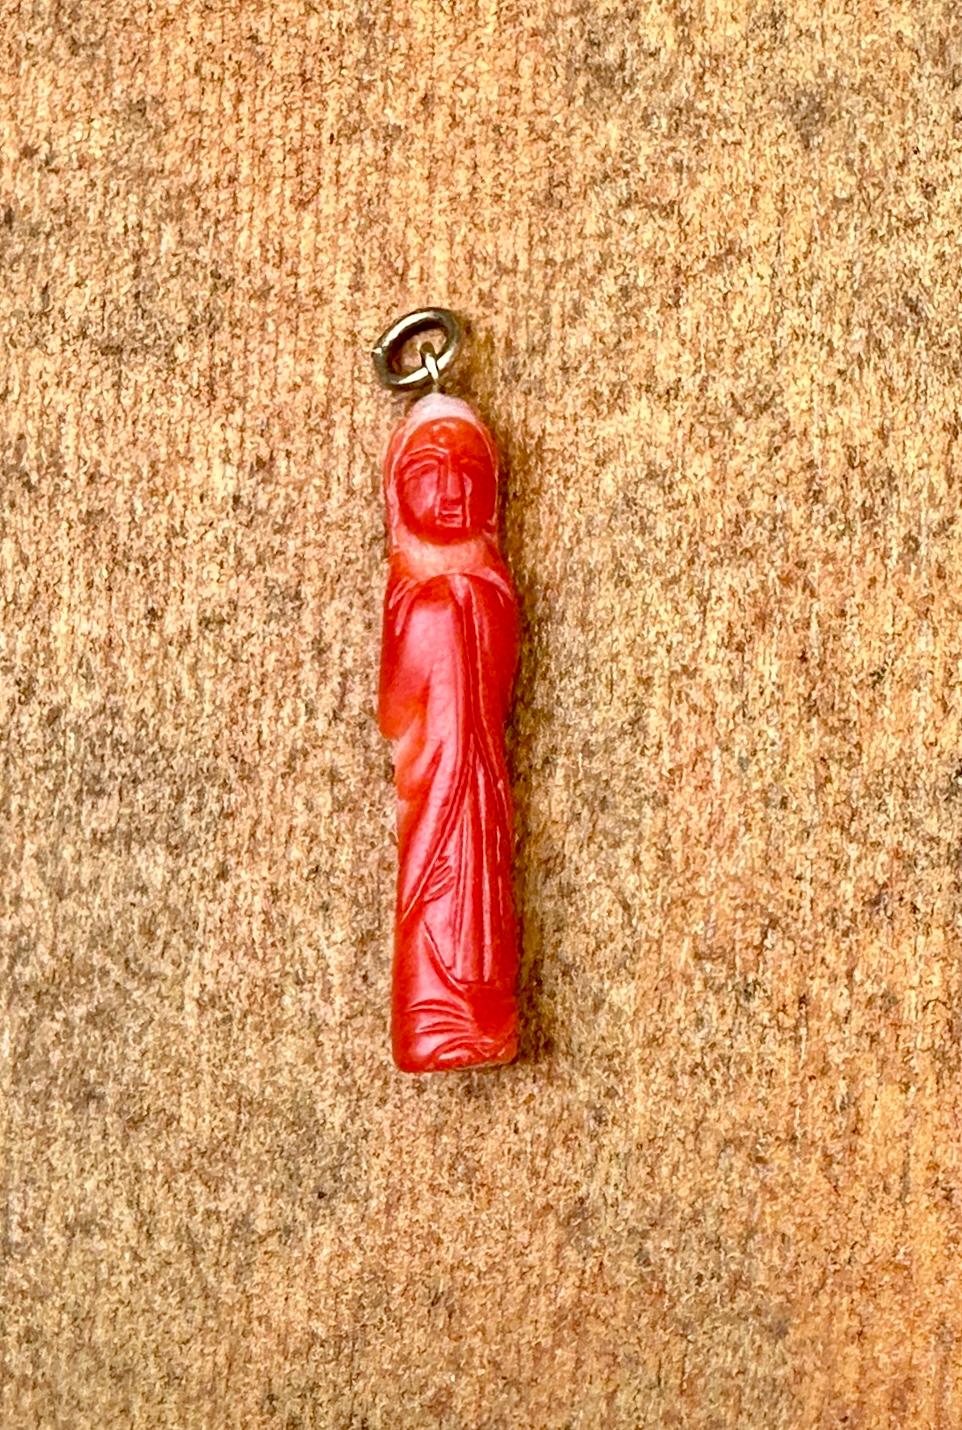 This is a wonderful antique Art Deco Salmon Pink Momo Coral Guan Yin Guanyin Pendant or Charm in 14 Karat Yellow Gold.  The Guan Yin Goddess is exquisitely carved in natural Pink Momo Coral.   The size of the Guan Yin is perfect to wear as a pendant